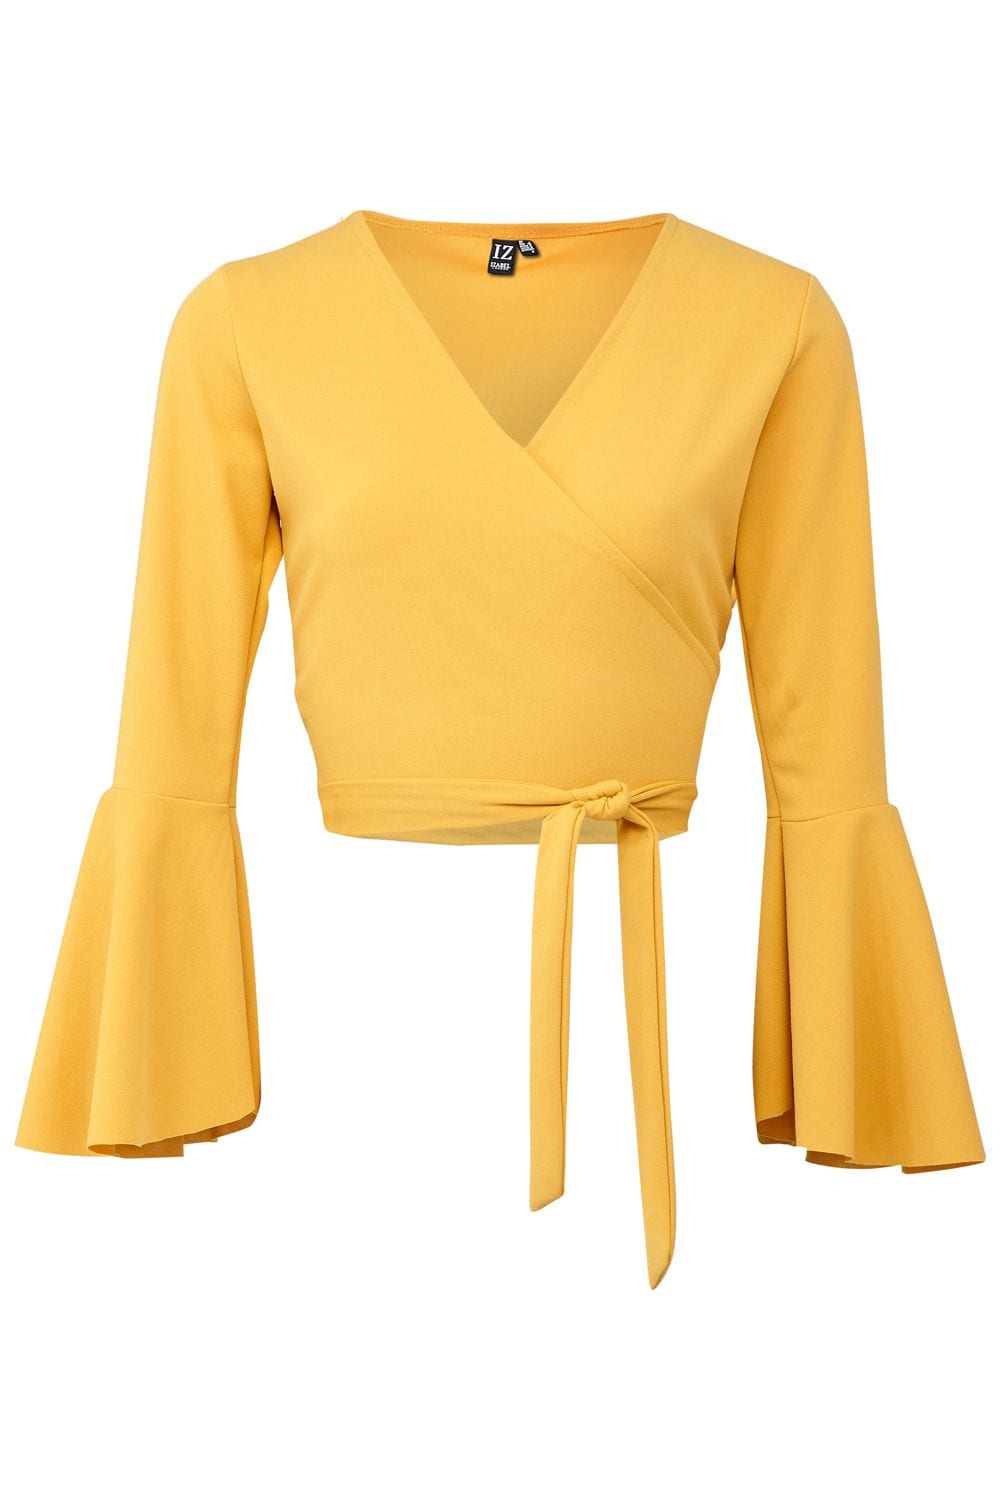 Yellow | Wrap Front Crop Top